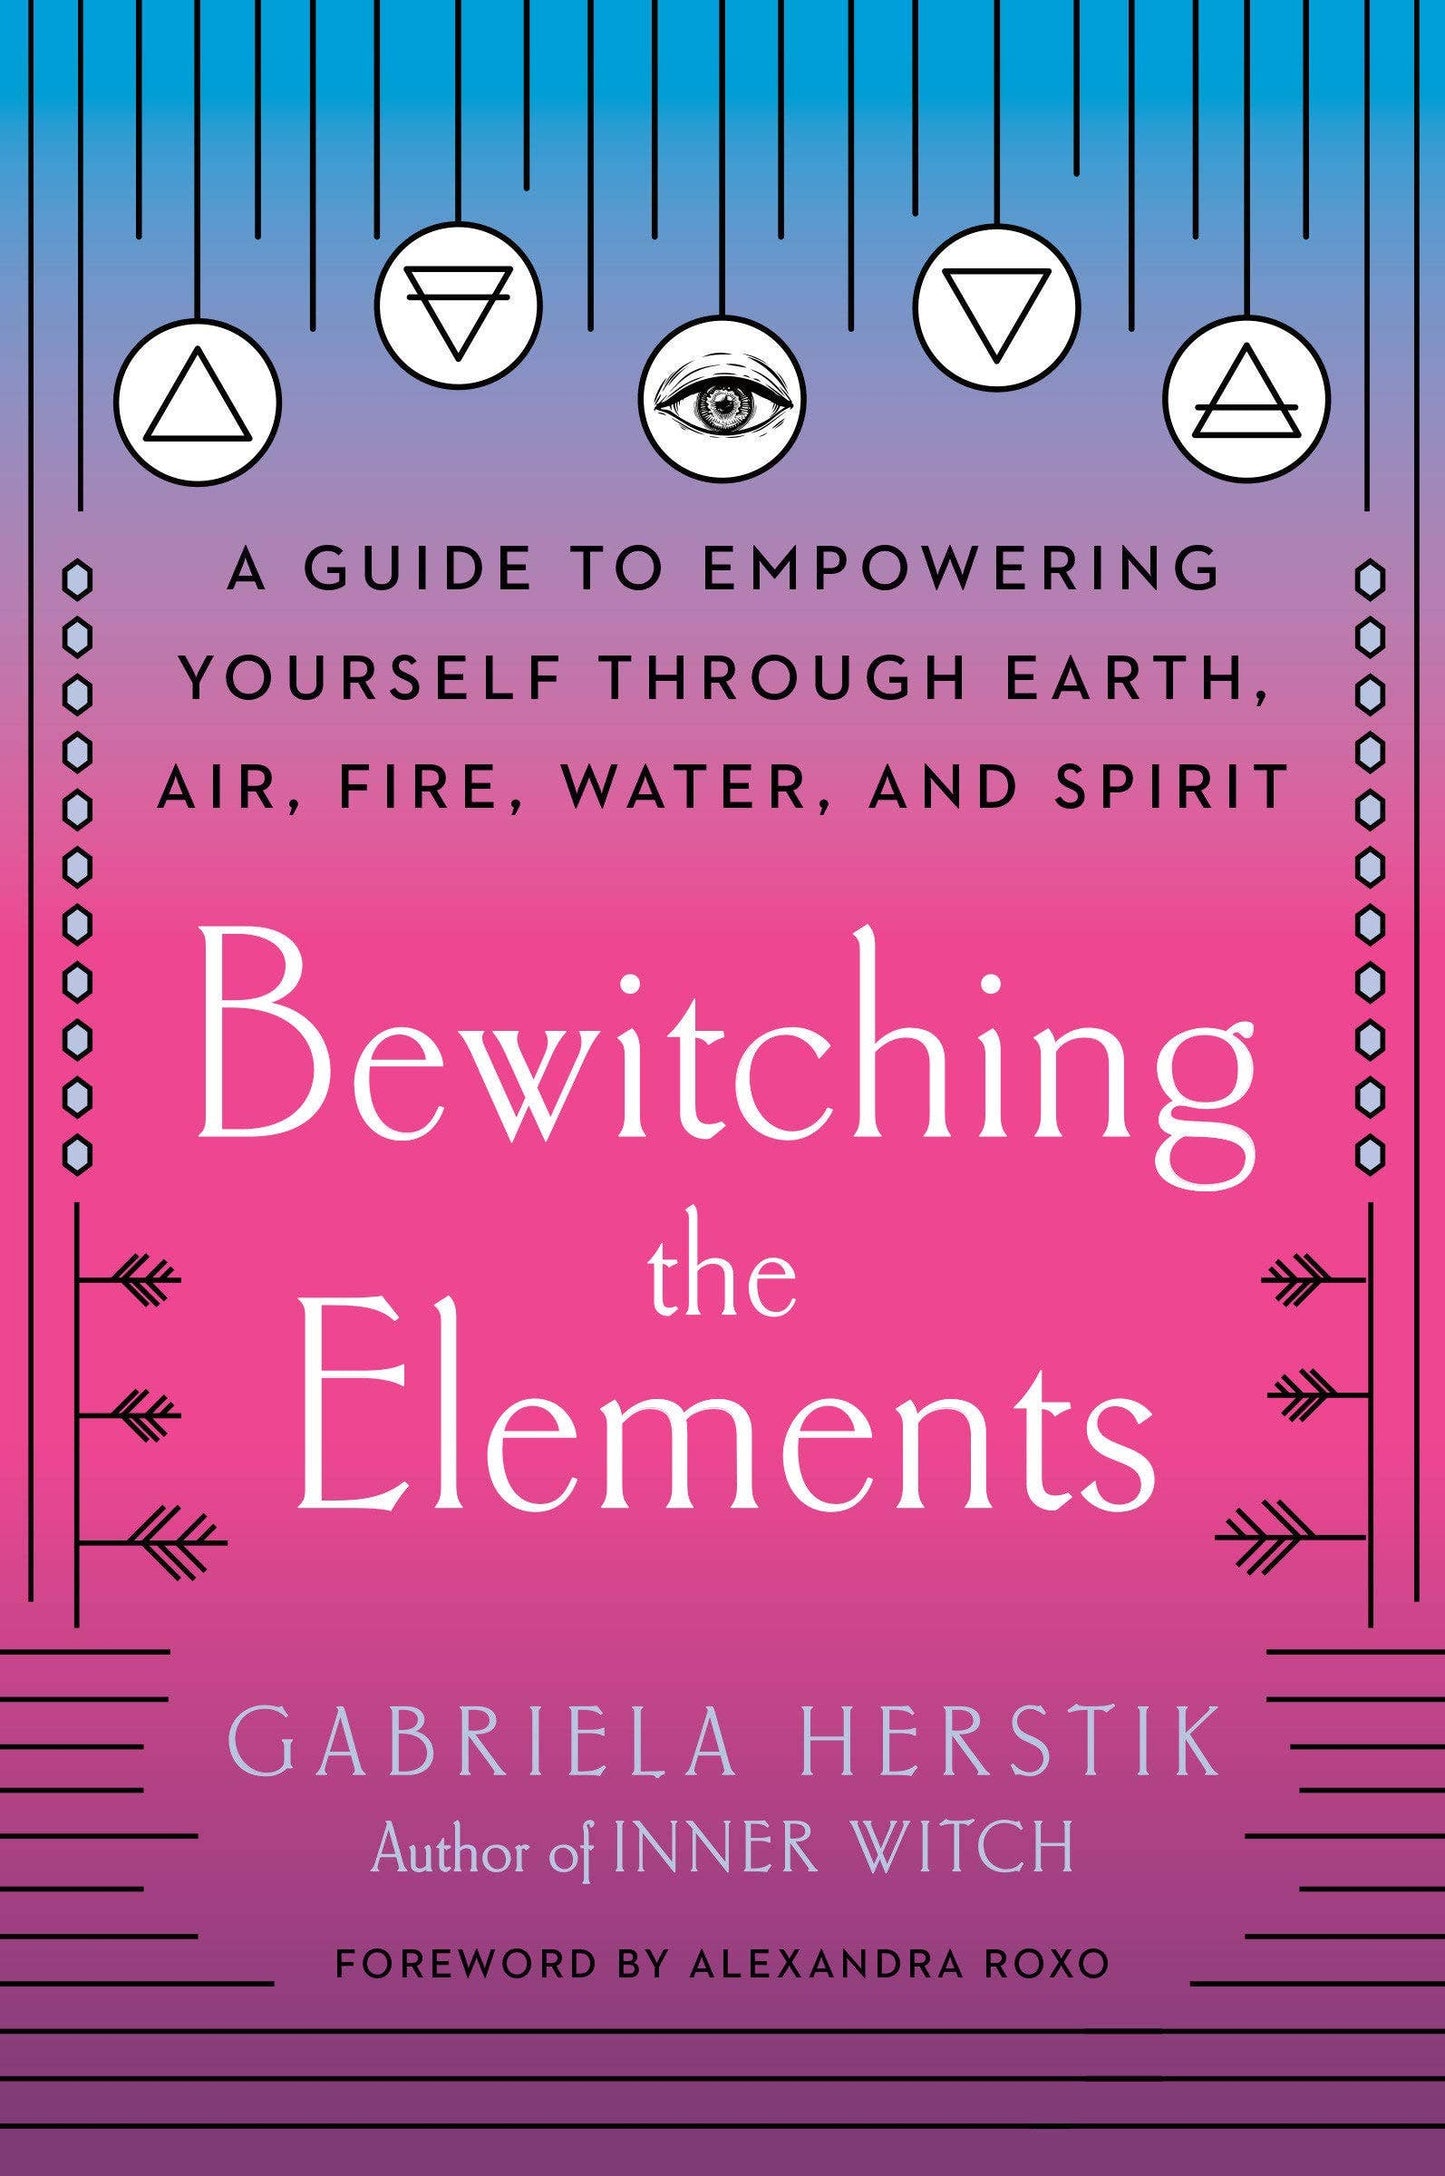 Bewitching the Elements: A Guide to Empowering Yourself